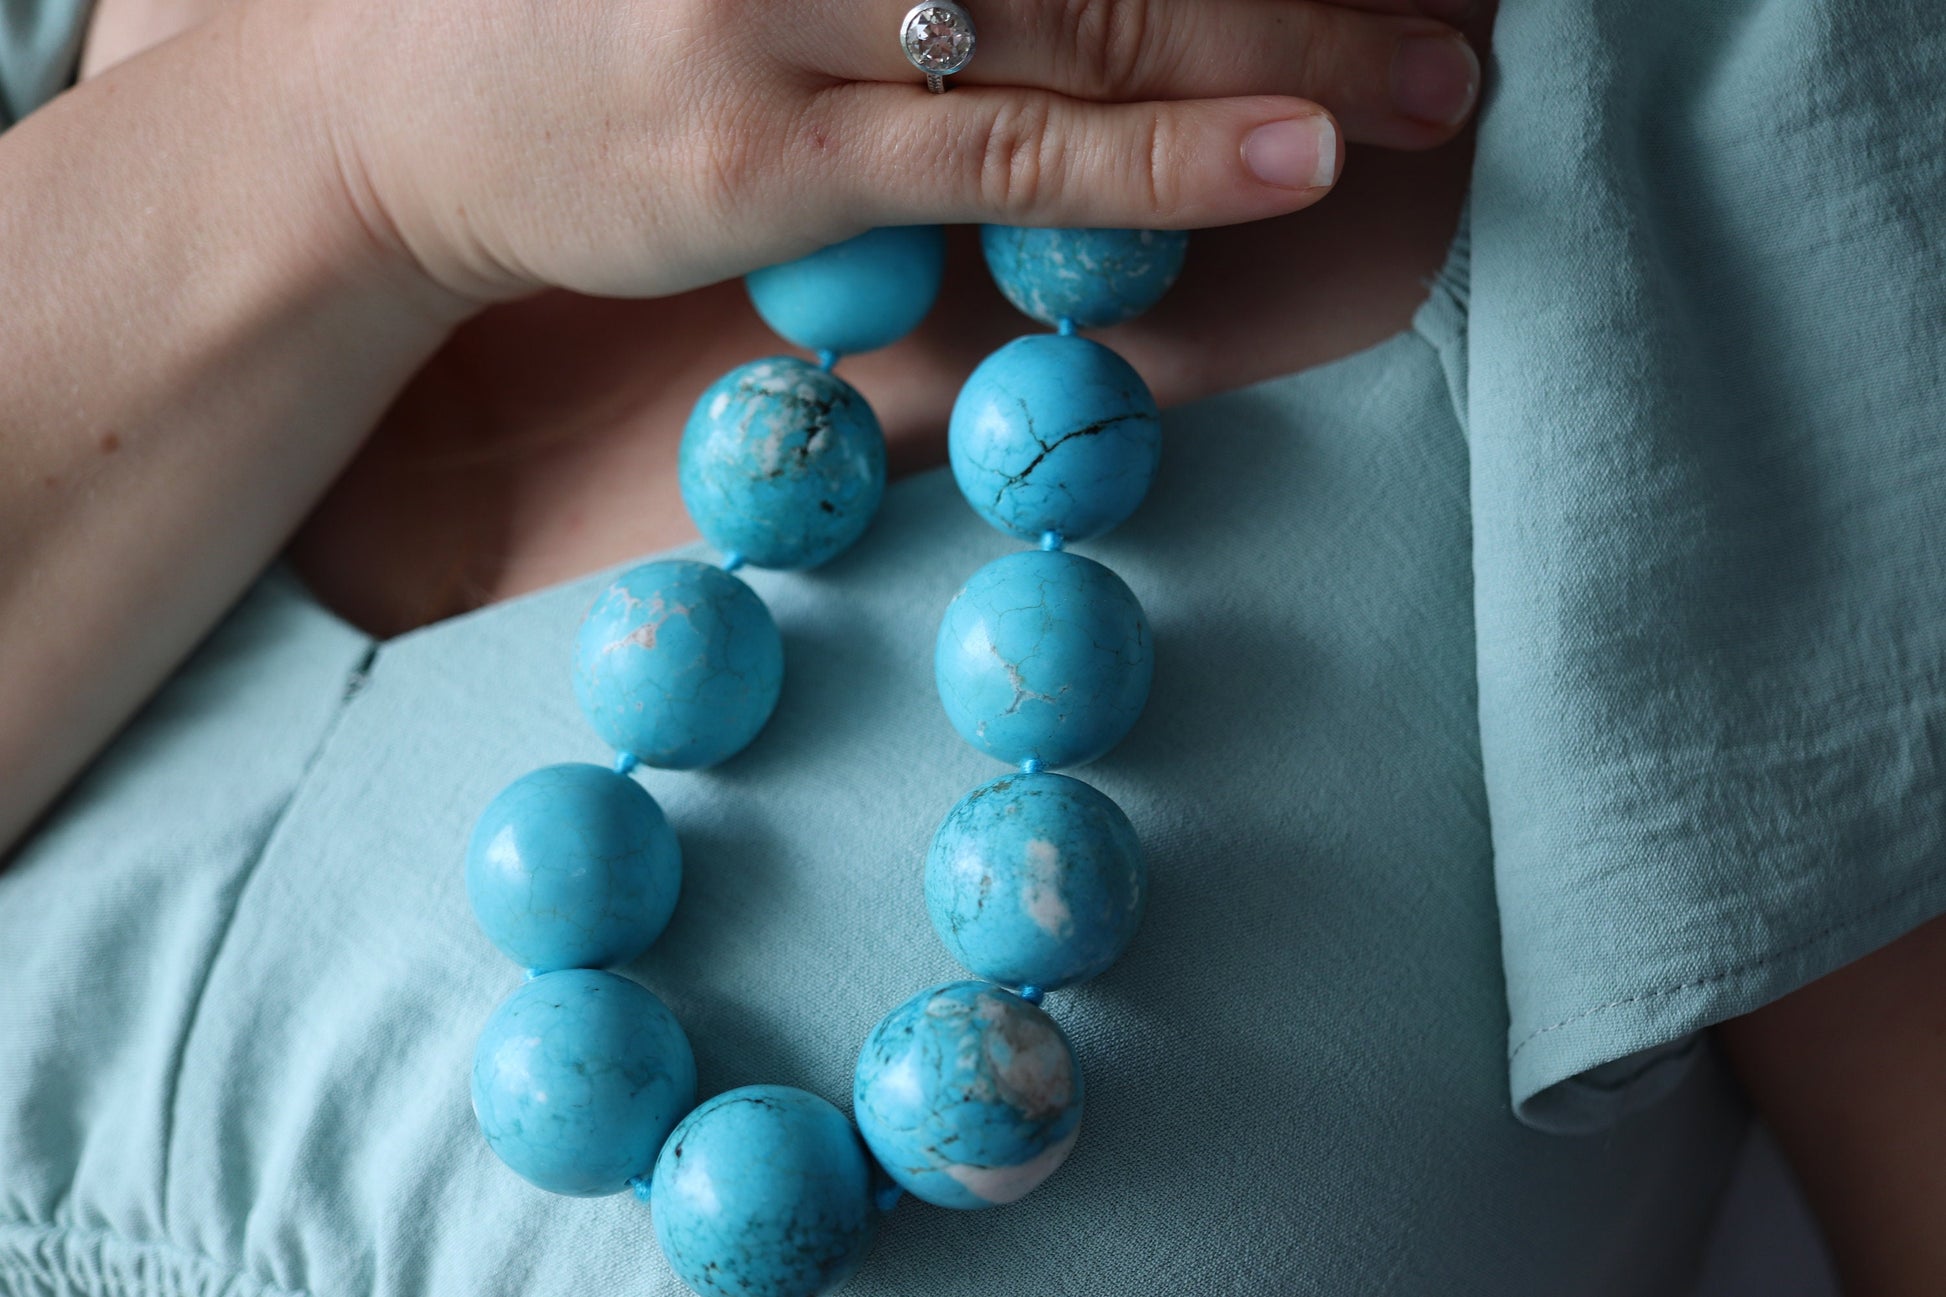 Dian Malouf Necklace. Round Turquoise Heavy sterling Silver Bead Necklace DLM Collection (st167)